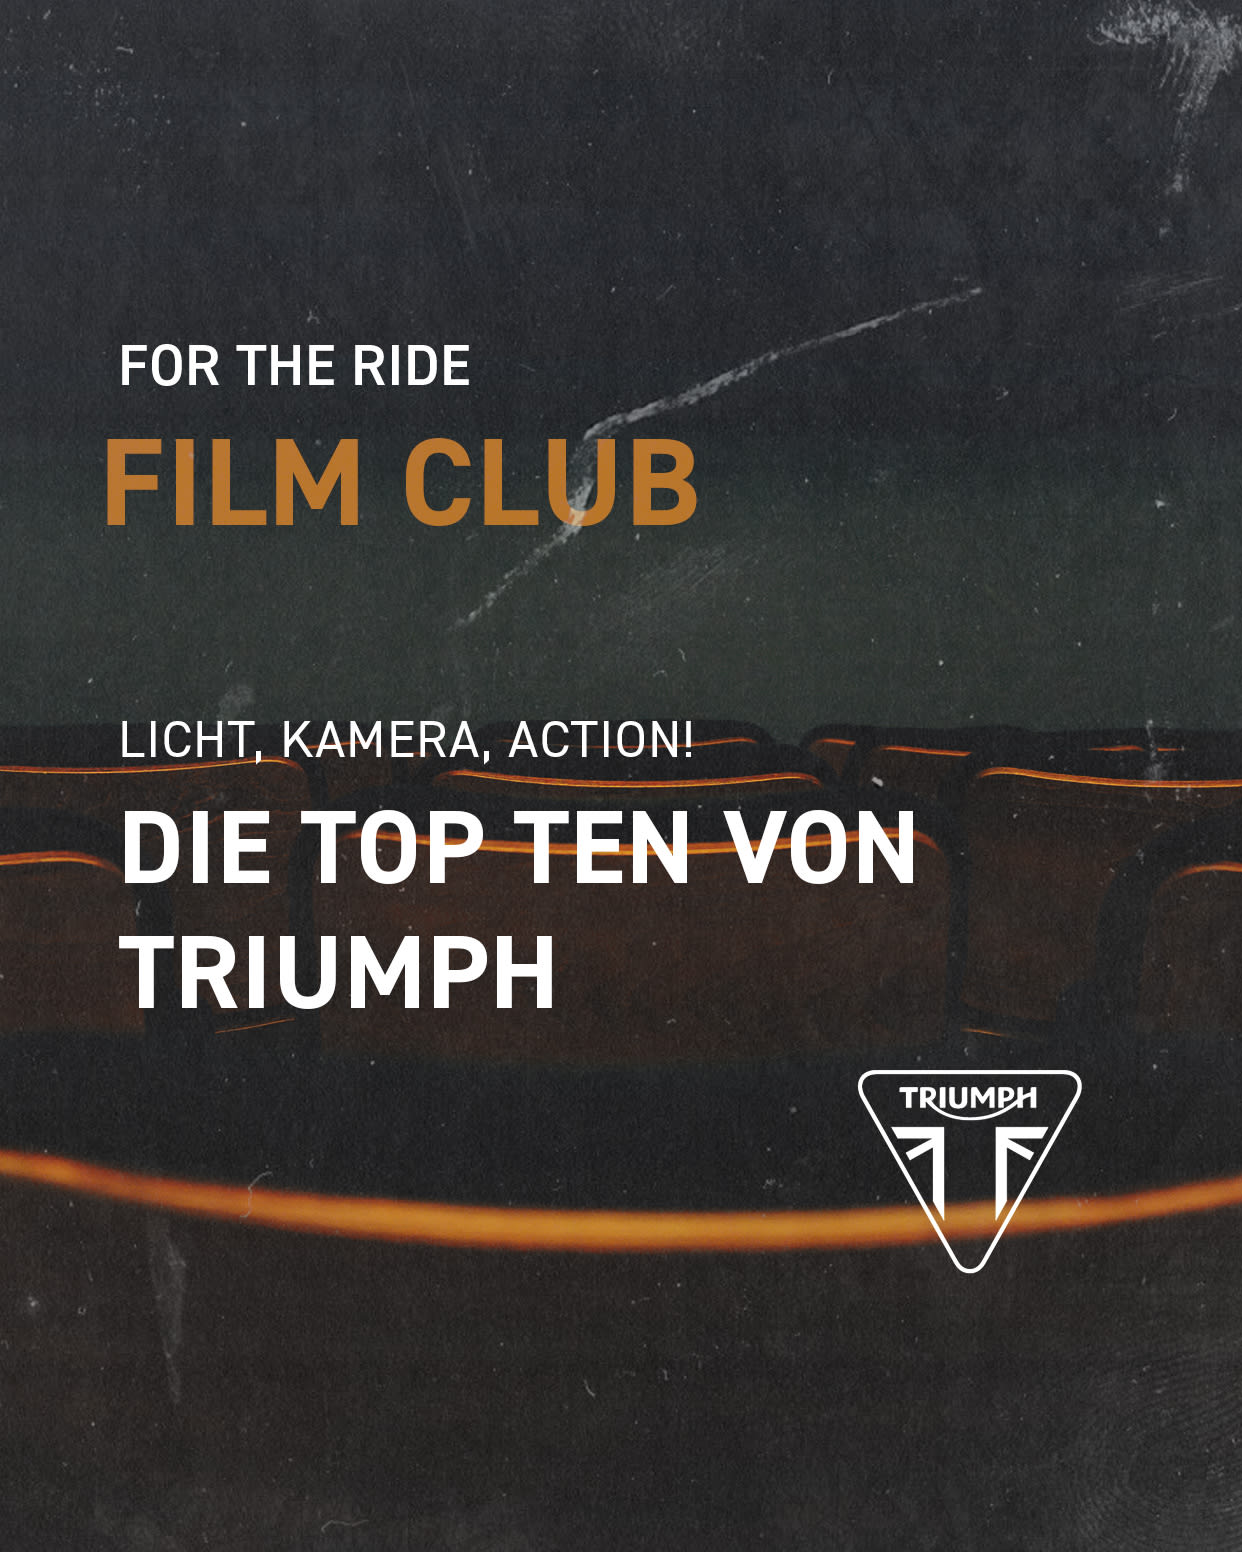 For the ride triumph top 10 films 